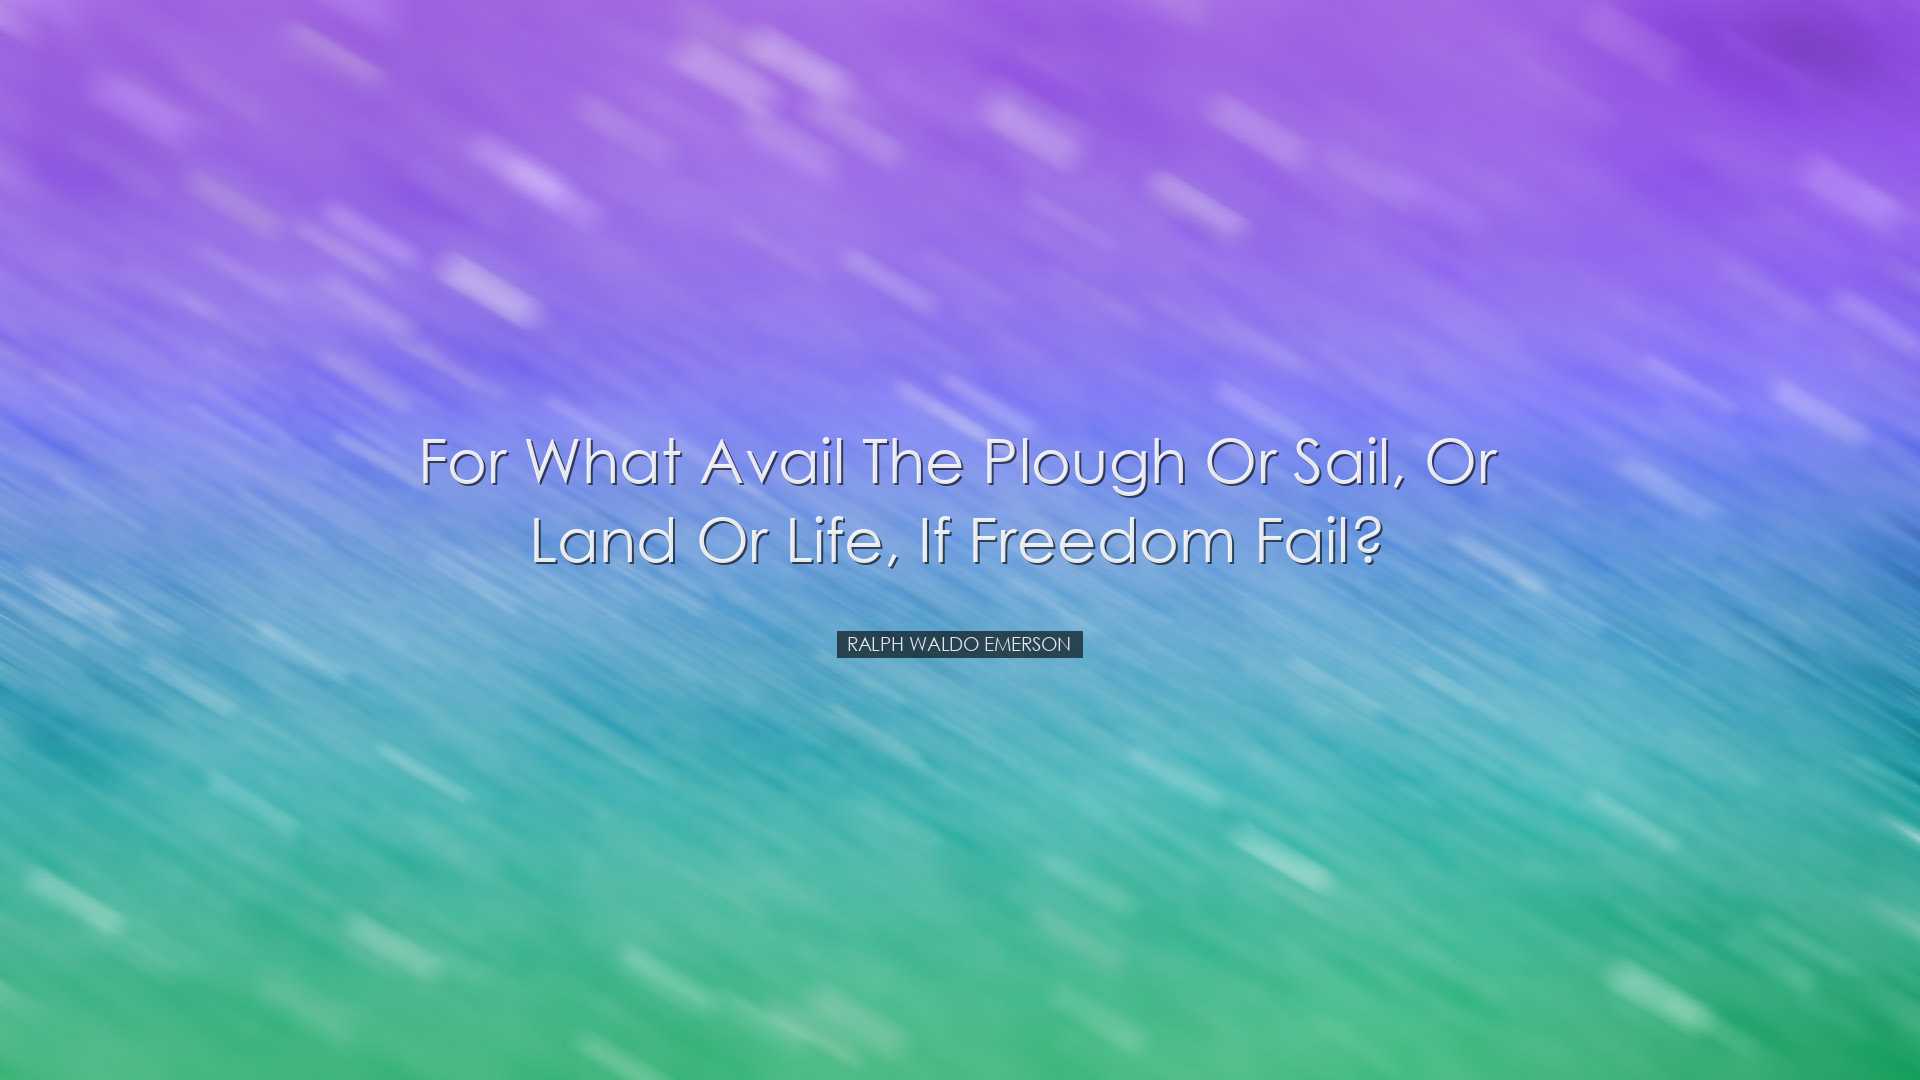 For what avail the plough or sail, or land or life, if freedom fai